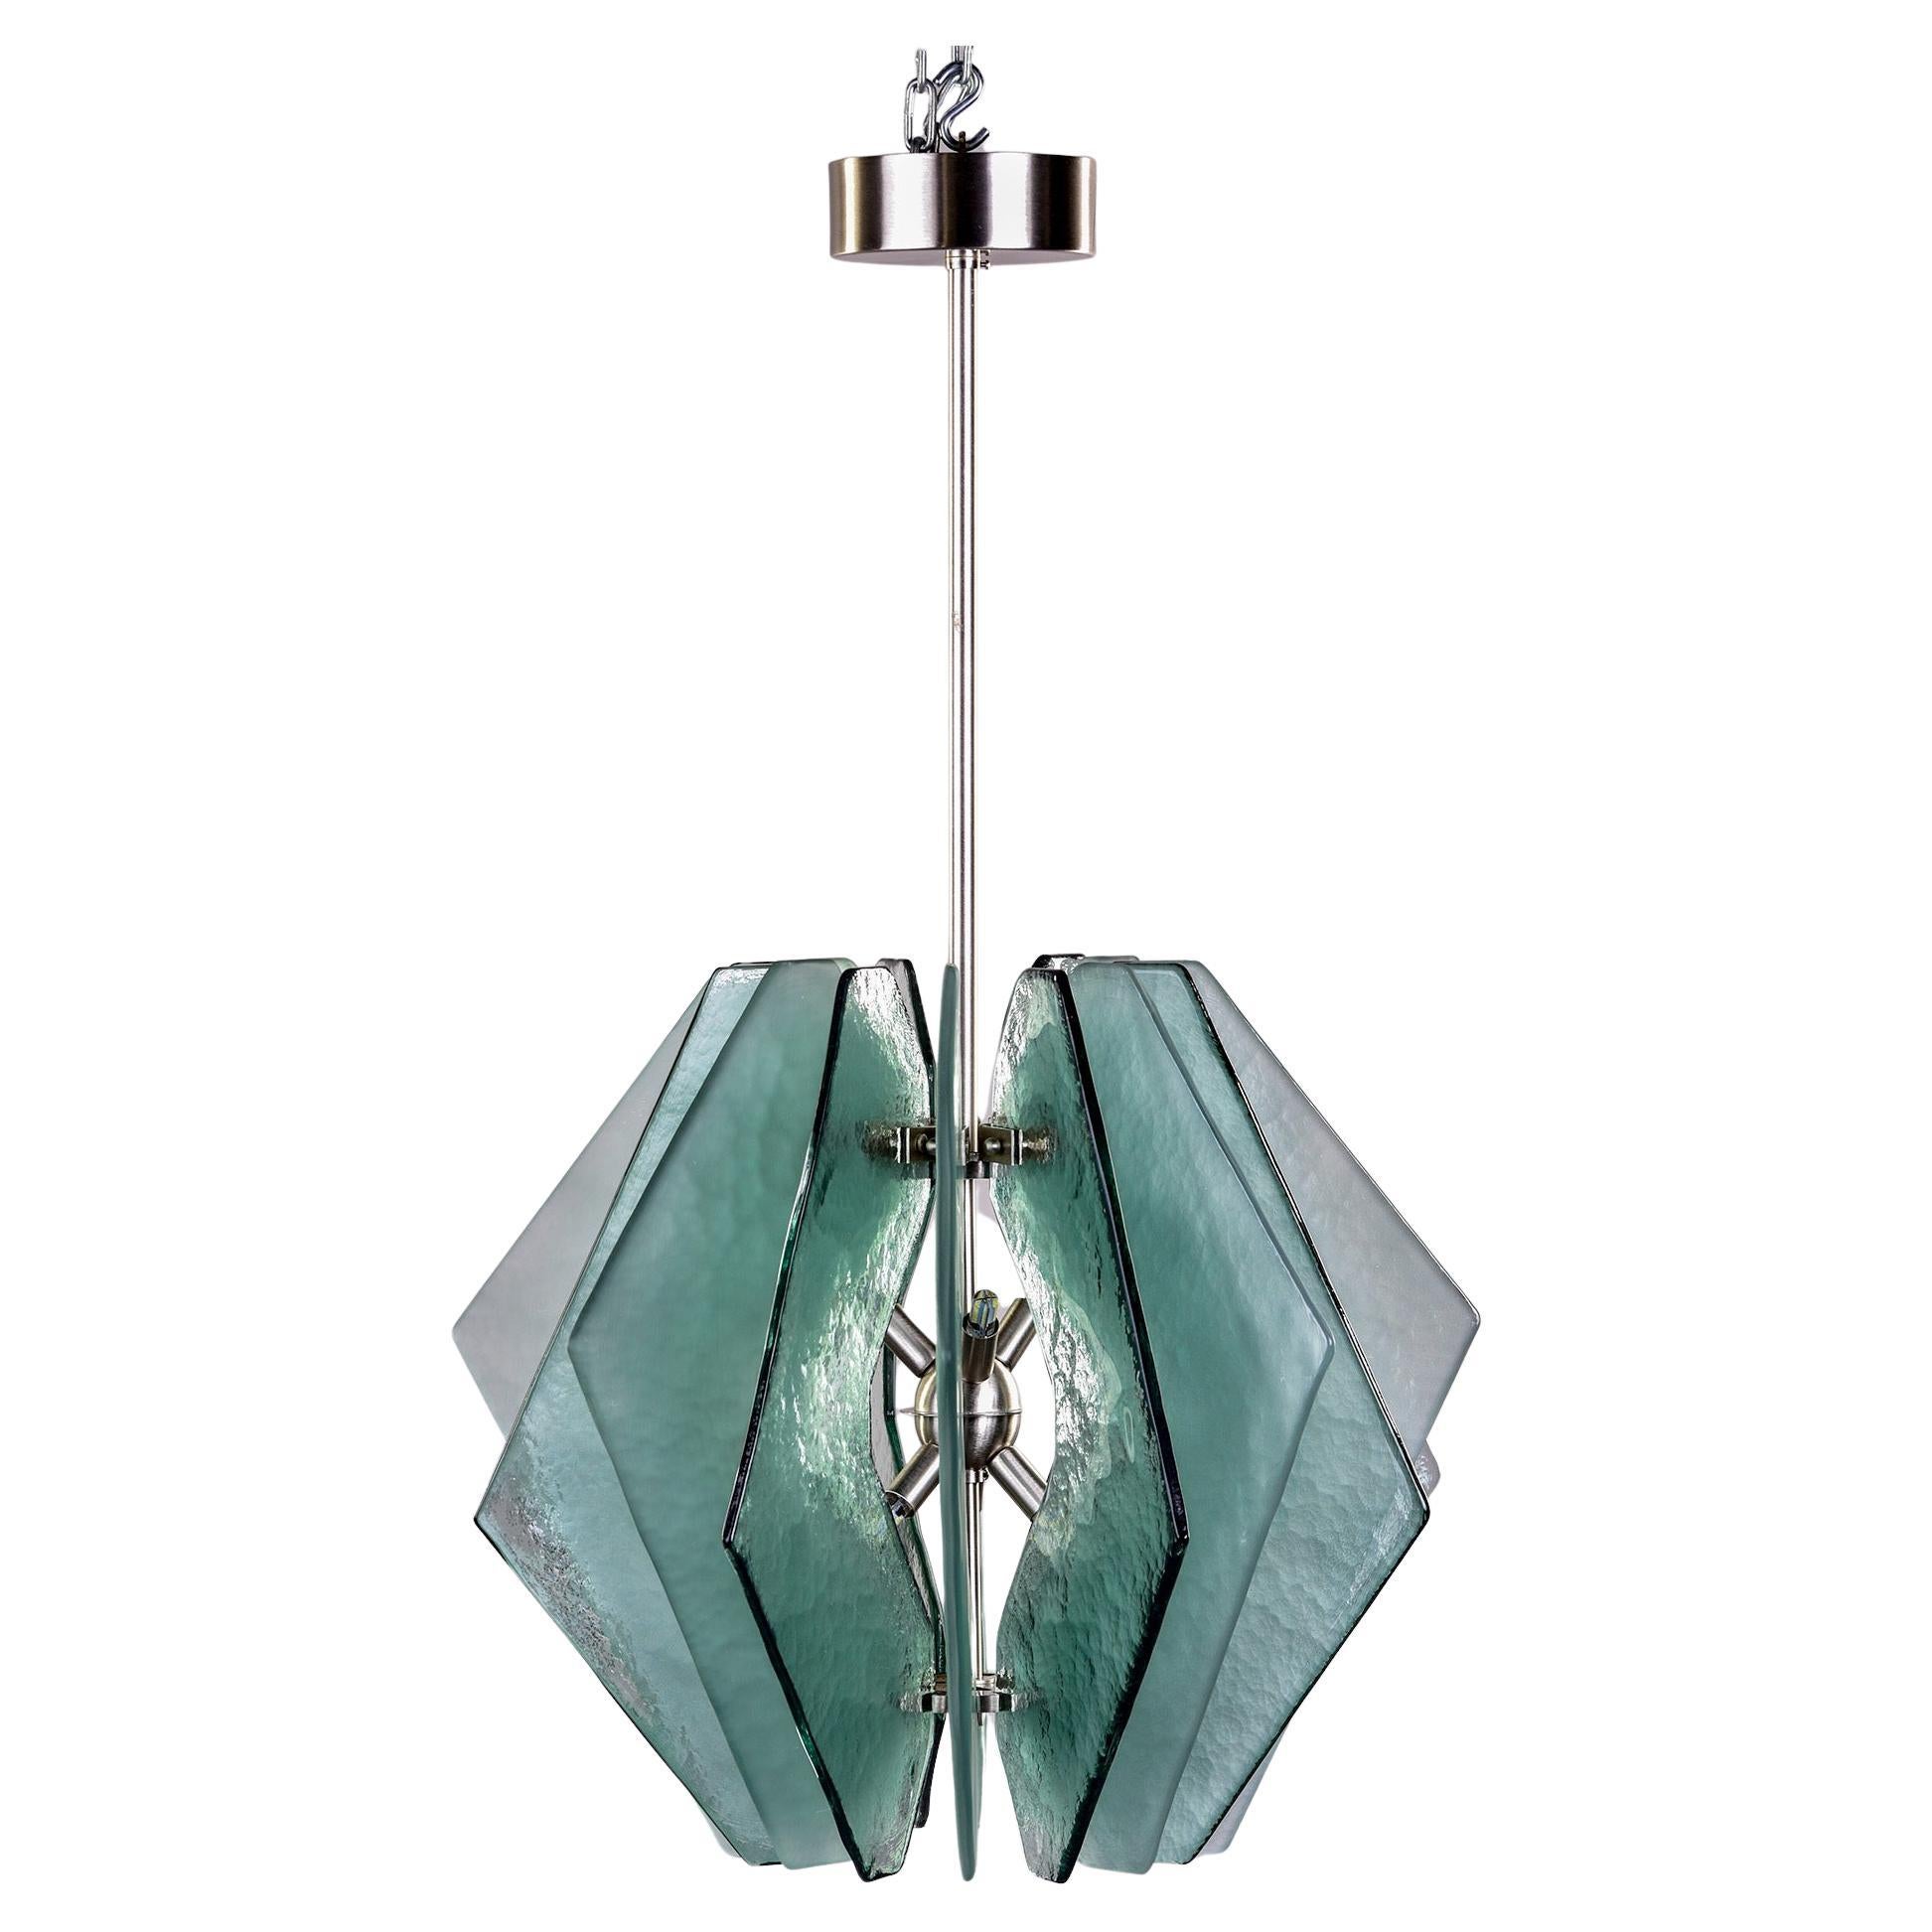 New Murano Chandelier with Glass Panels in Pale Green